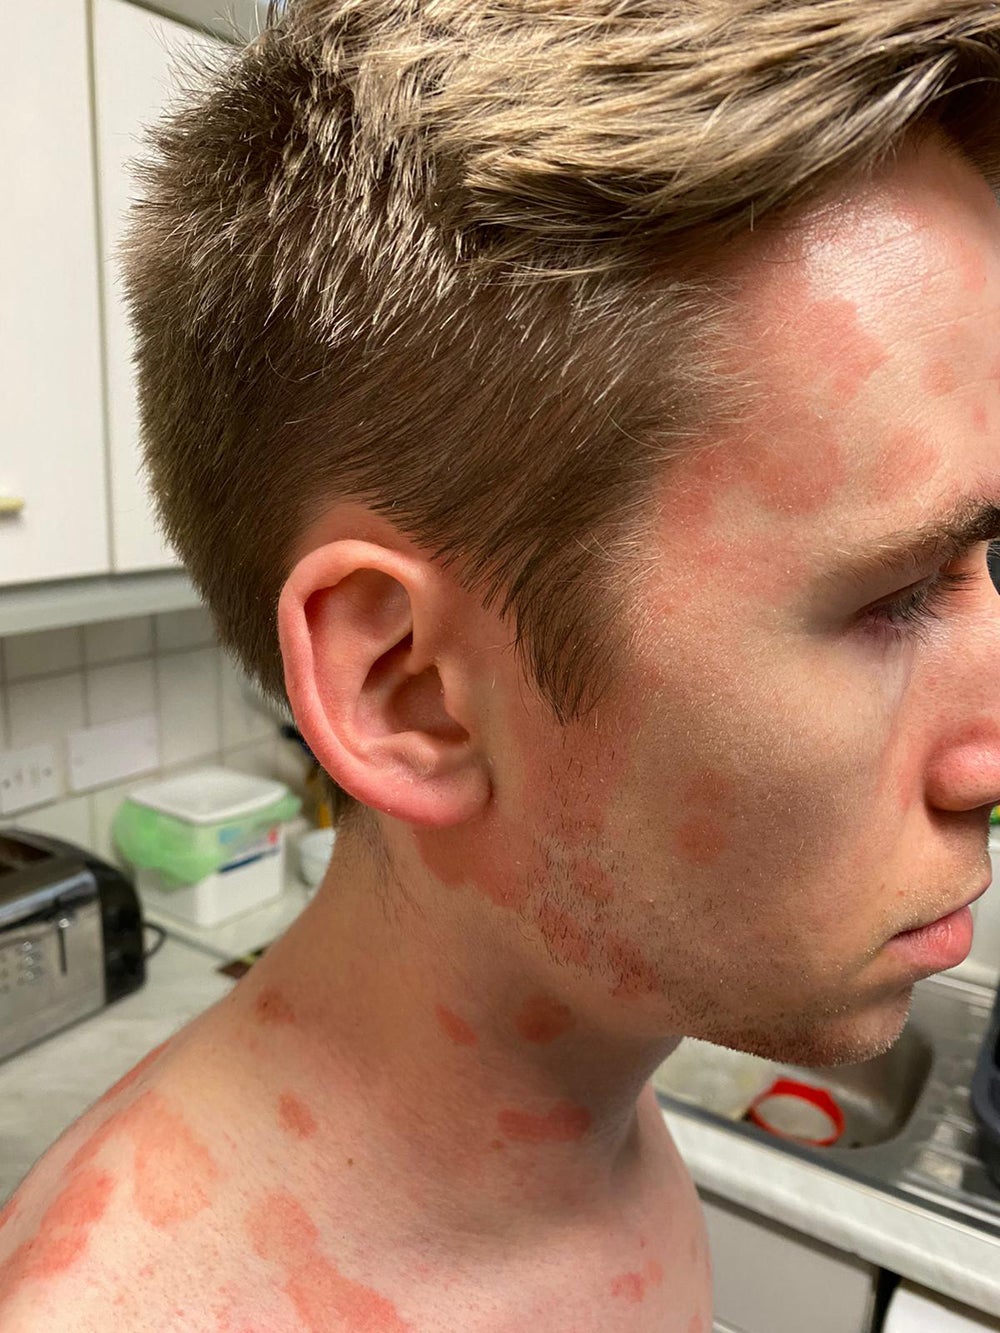 Scot Cunningham, 27, lost all confidence when the psoriasis spread to his face (Collect/PA Real Life)